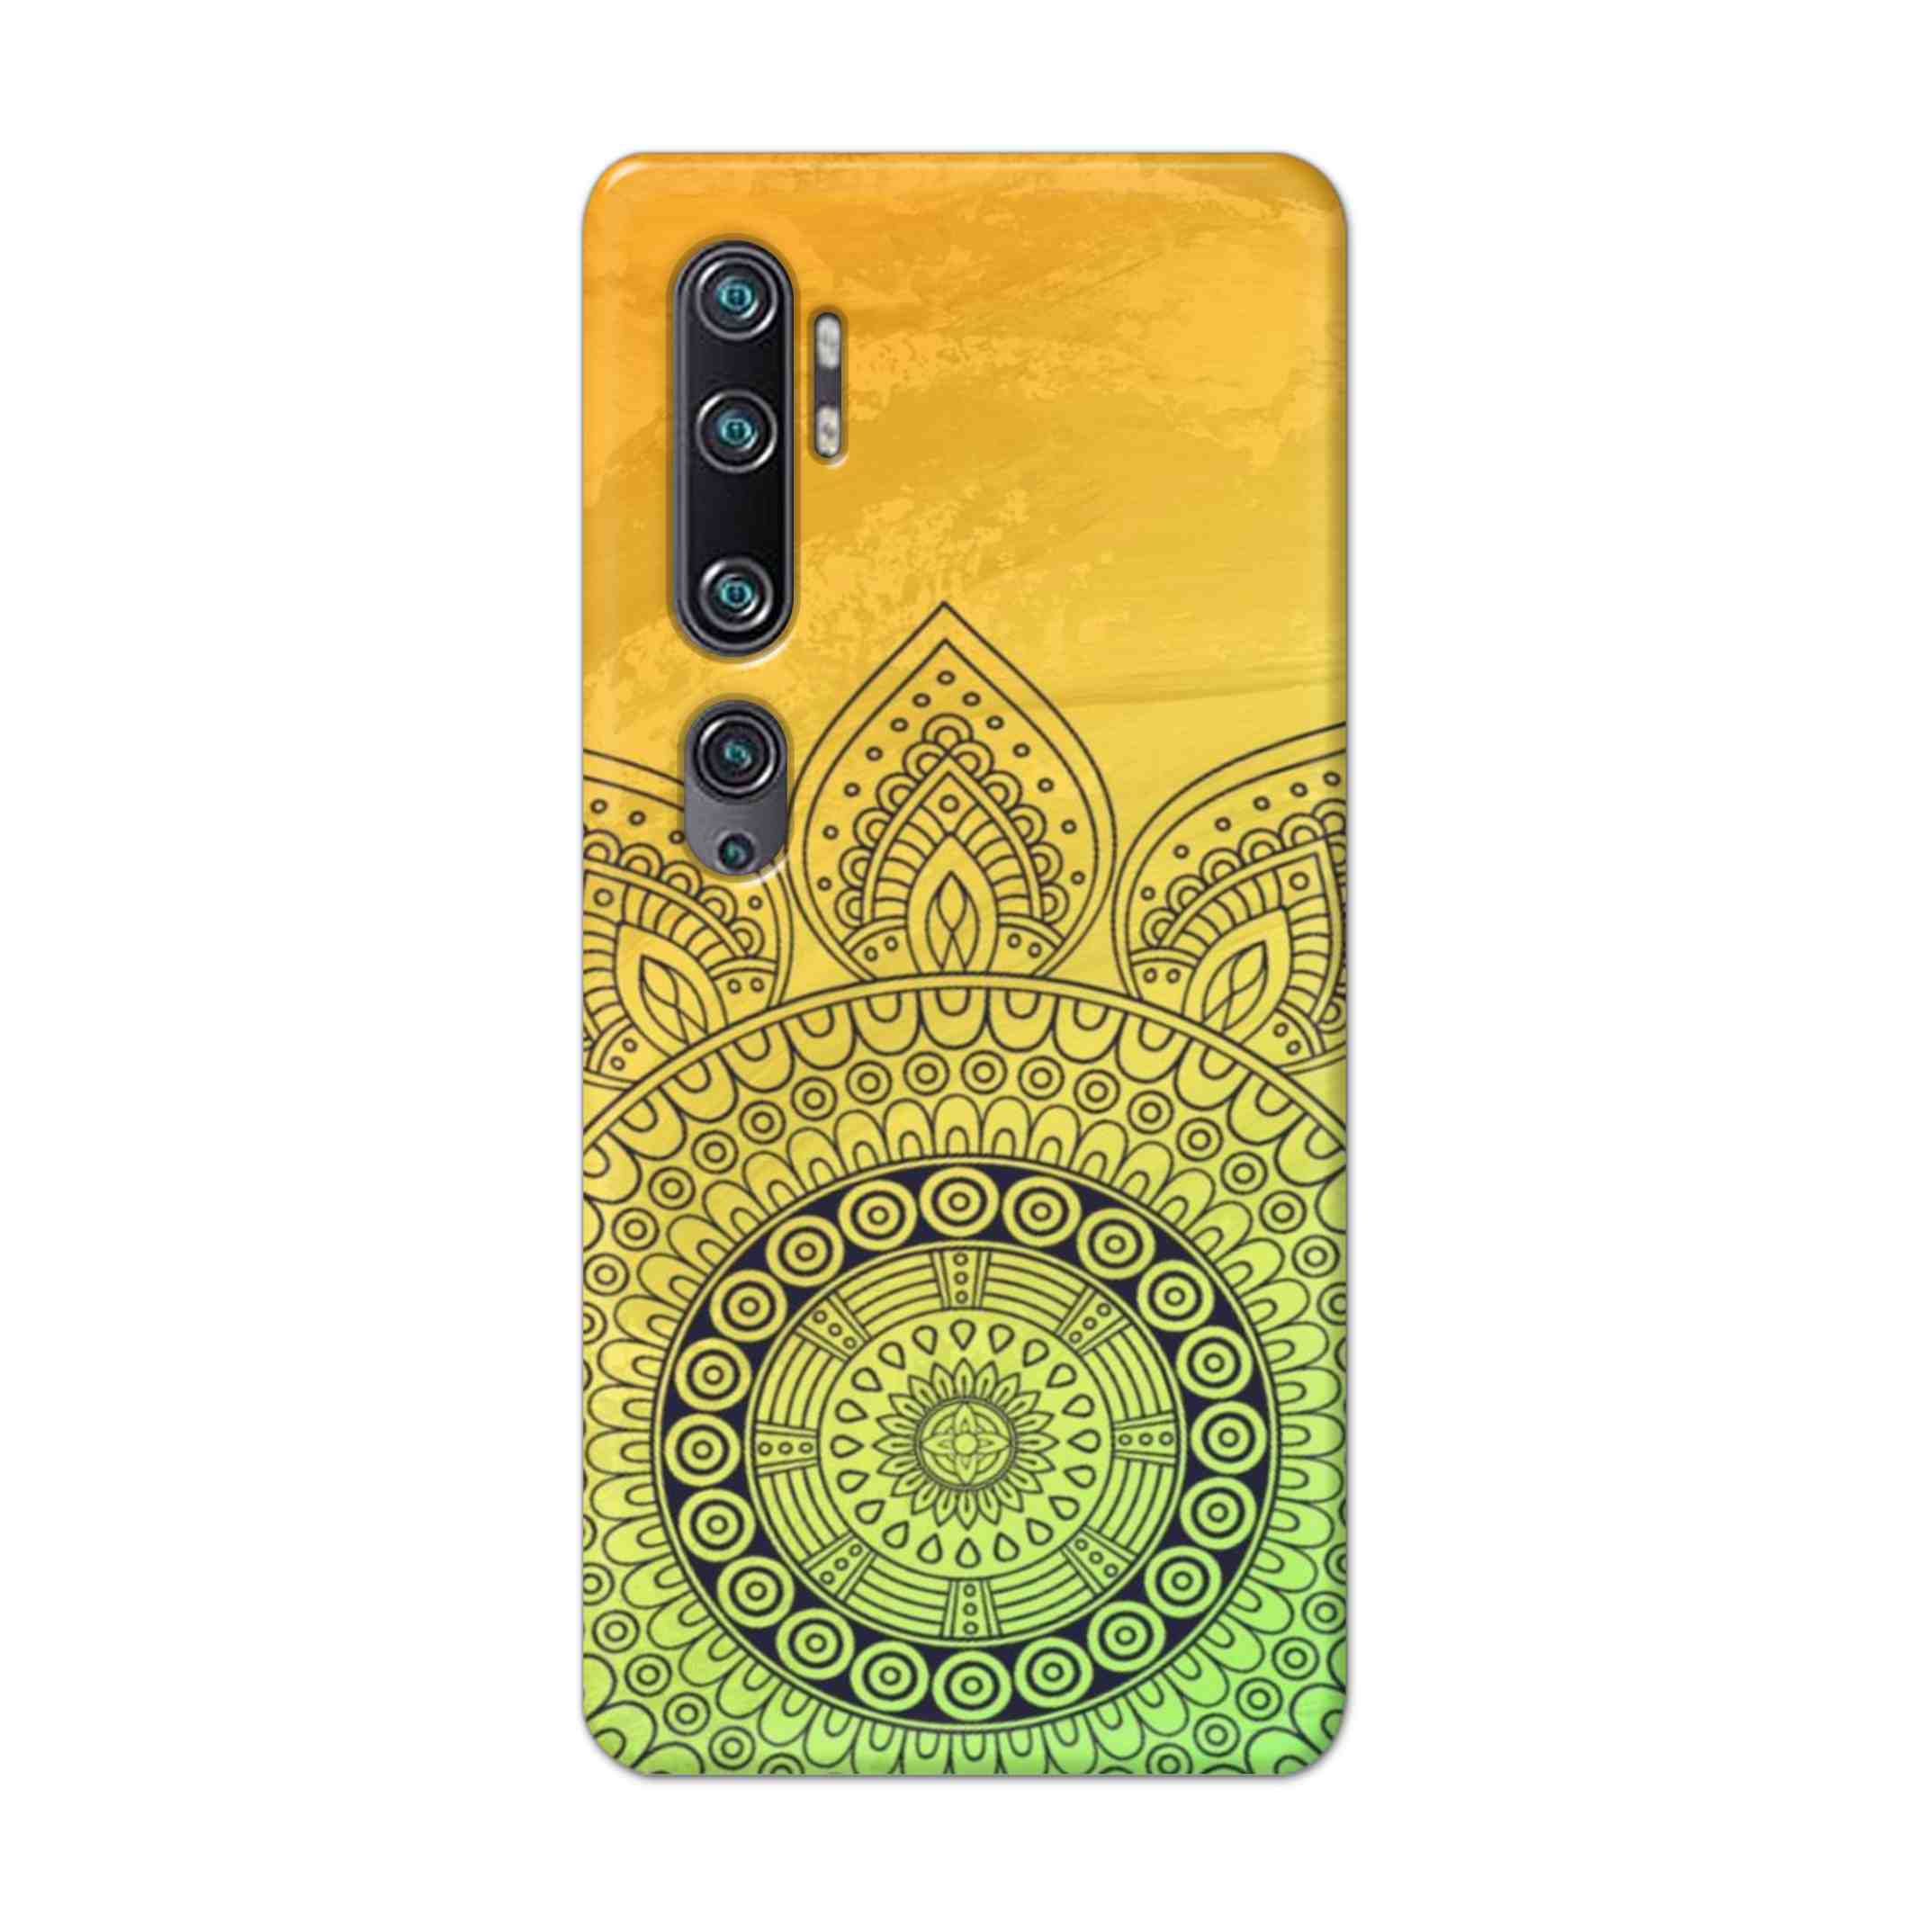 Buy Yellow Rangoli Hard Back Mobile Phone Case Cover For Xiaomi Mi Note 10 Online